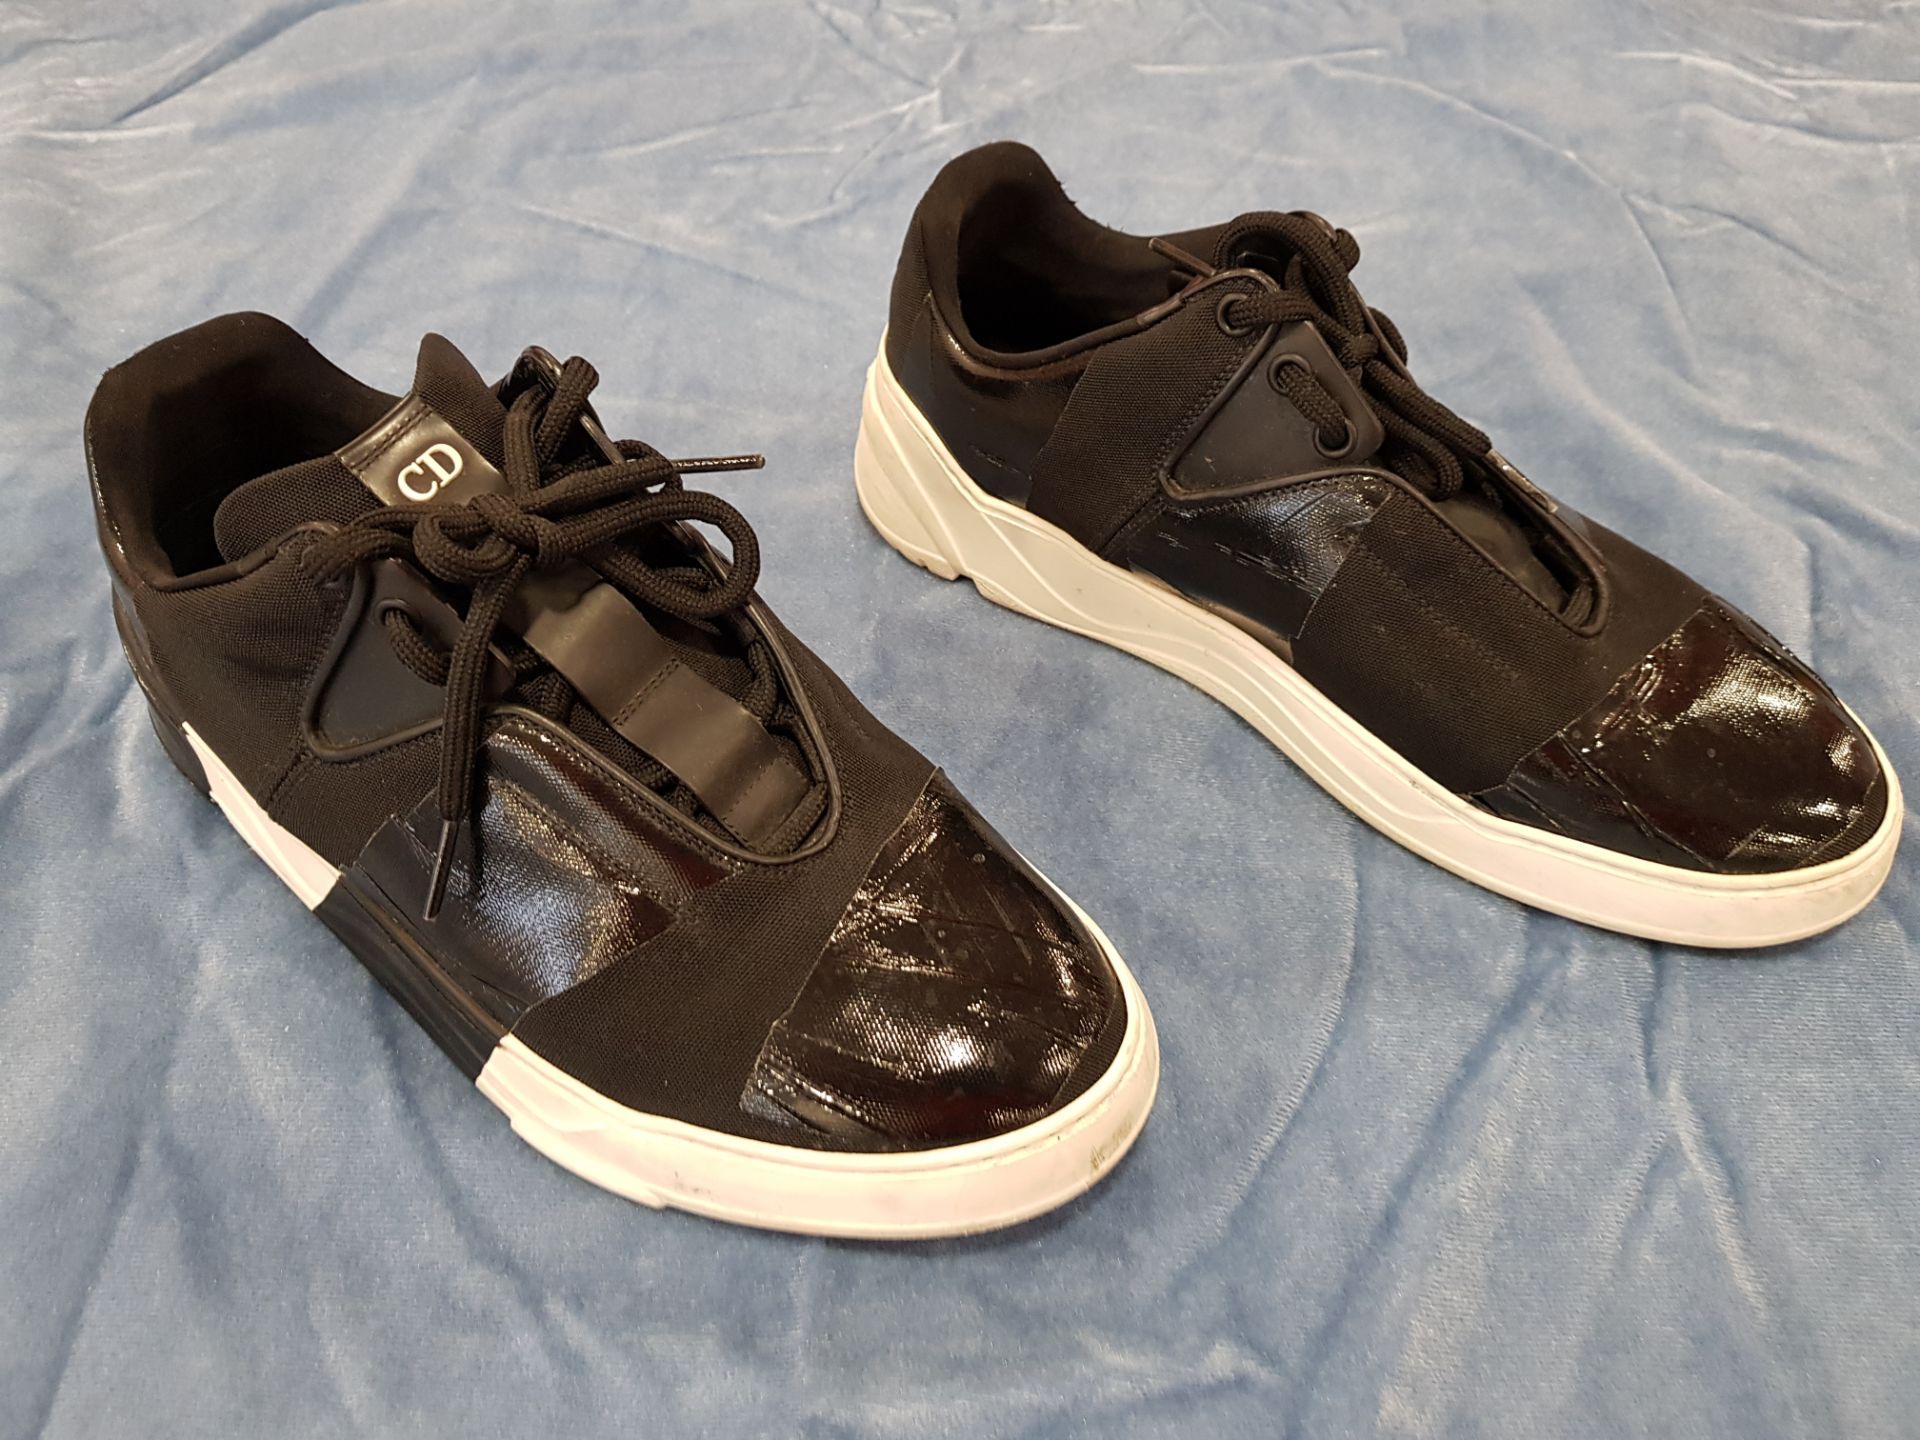 1 X PAIR CHRISTIAN DIOR BLACK TRAINERS SIZE 40 - PLEASE NOTE ITEMS PRE OWNED NOT NEW